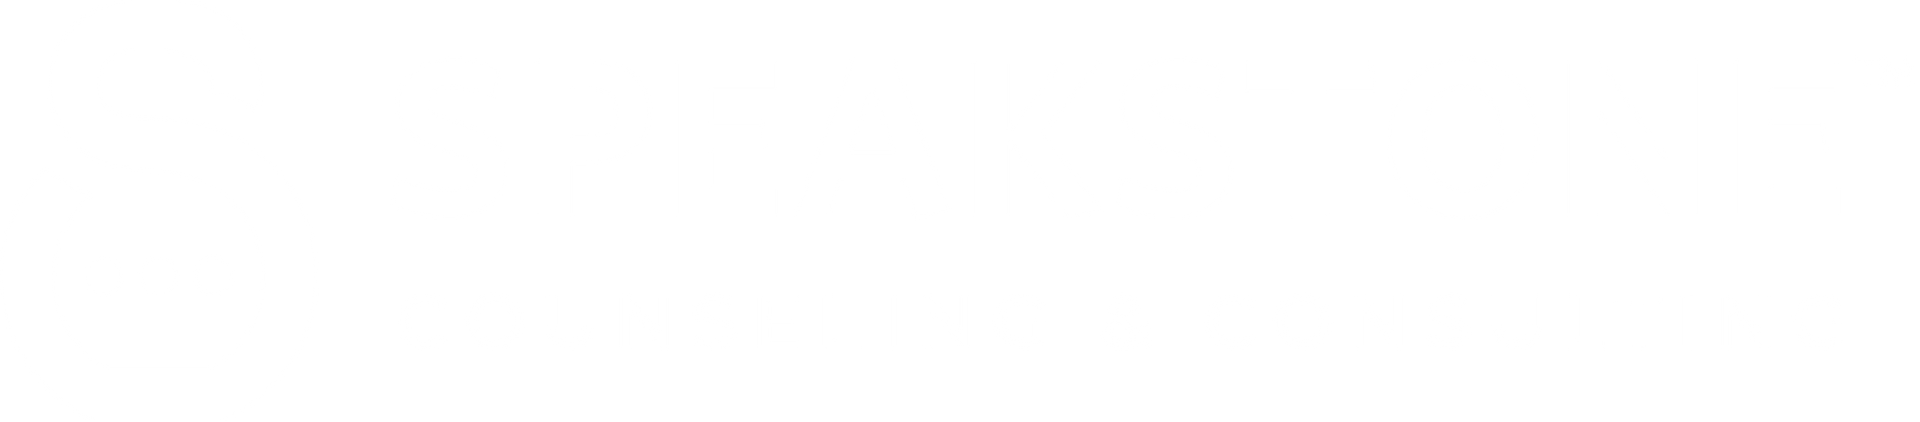 Speakstone Counseling & Consulting logo.